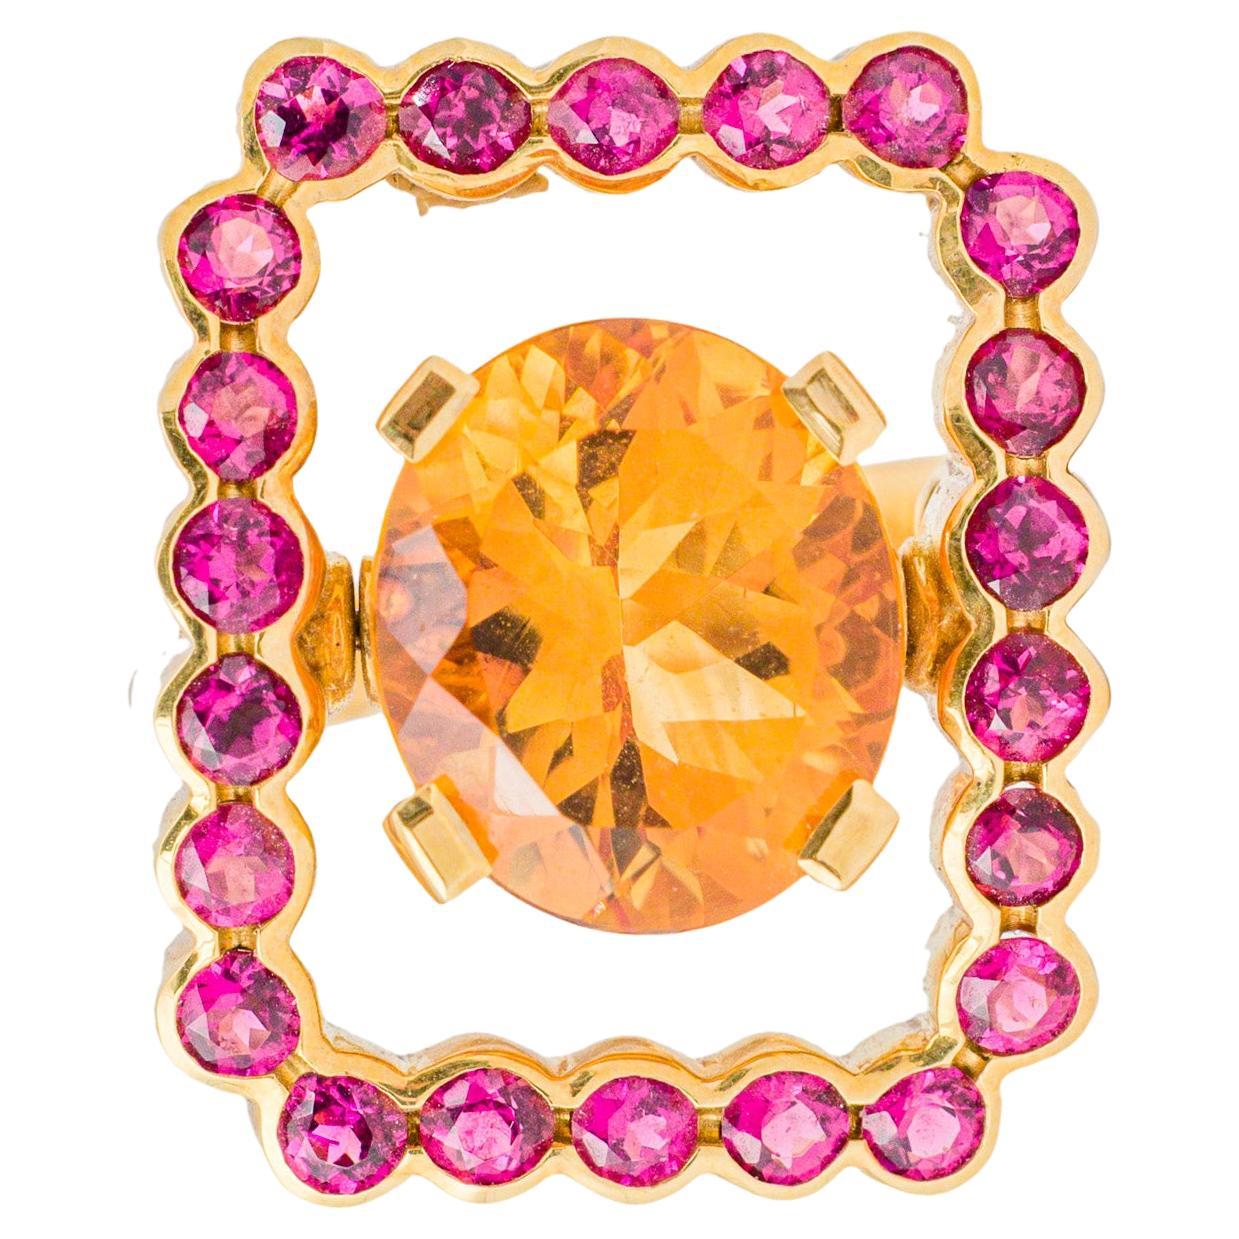 "Costis" Frame In Motion Ring with 7.22 crts Citrine and Pink Tourmalines For Sale